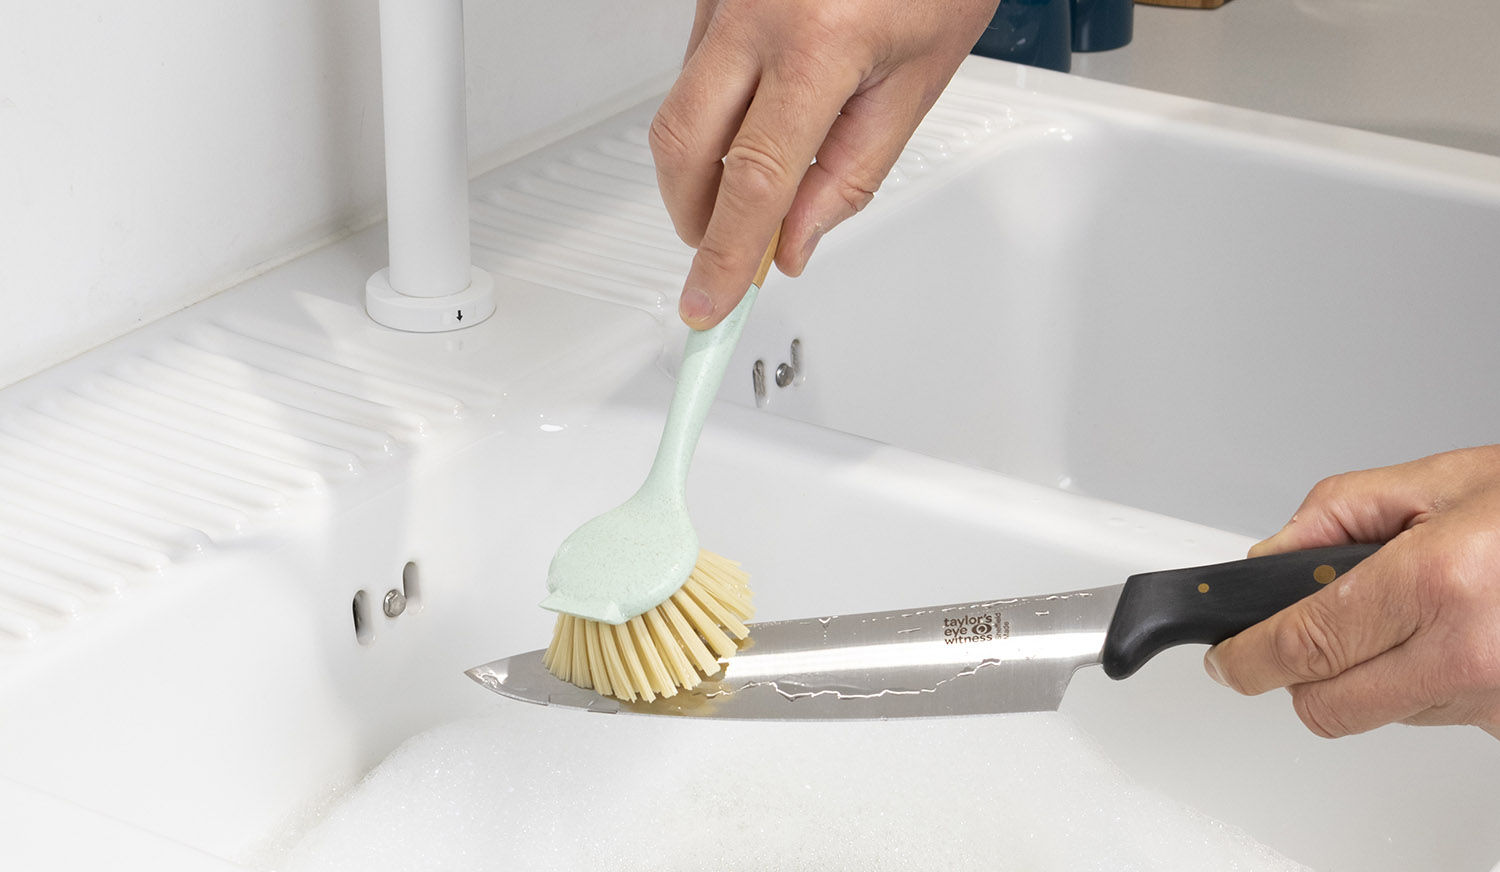 Washing a knife with a dish brush